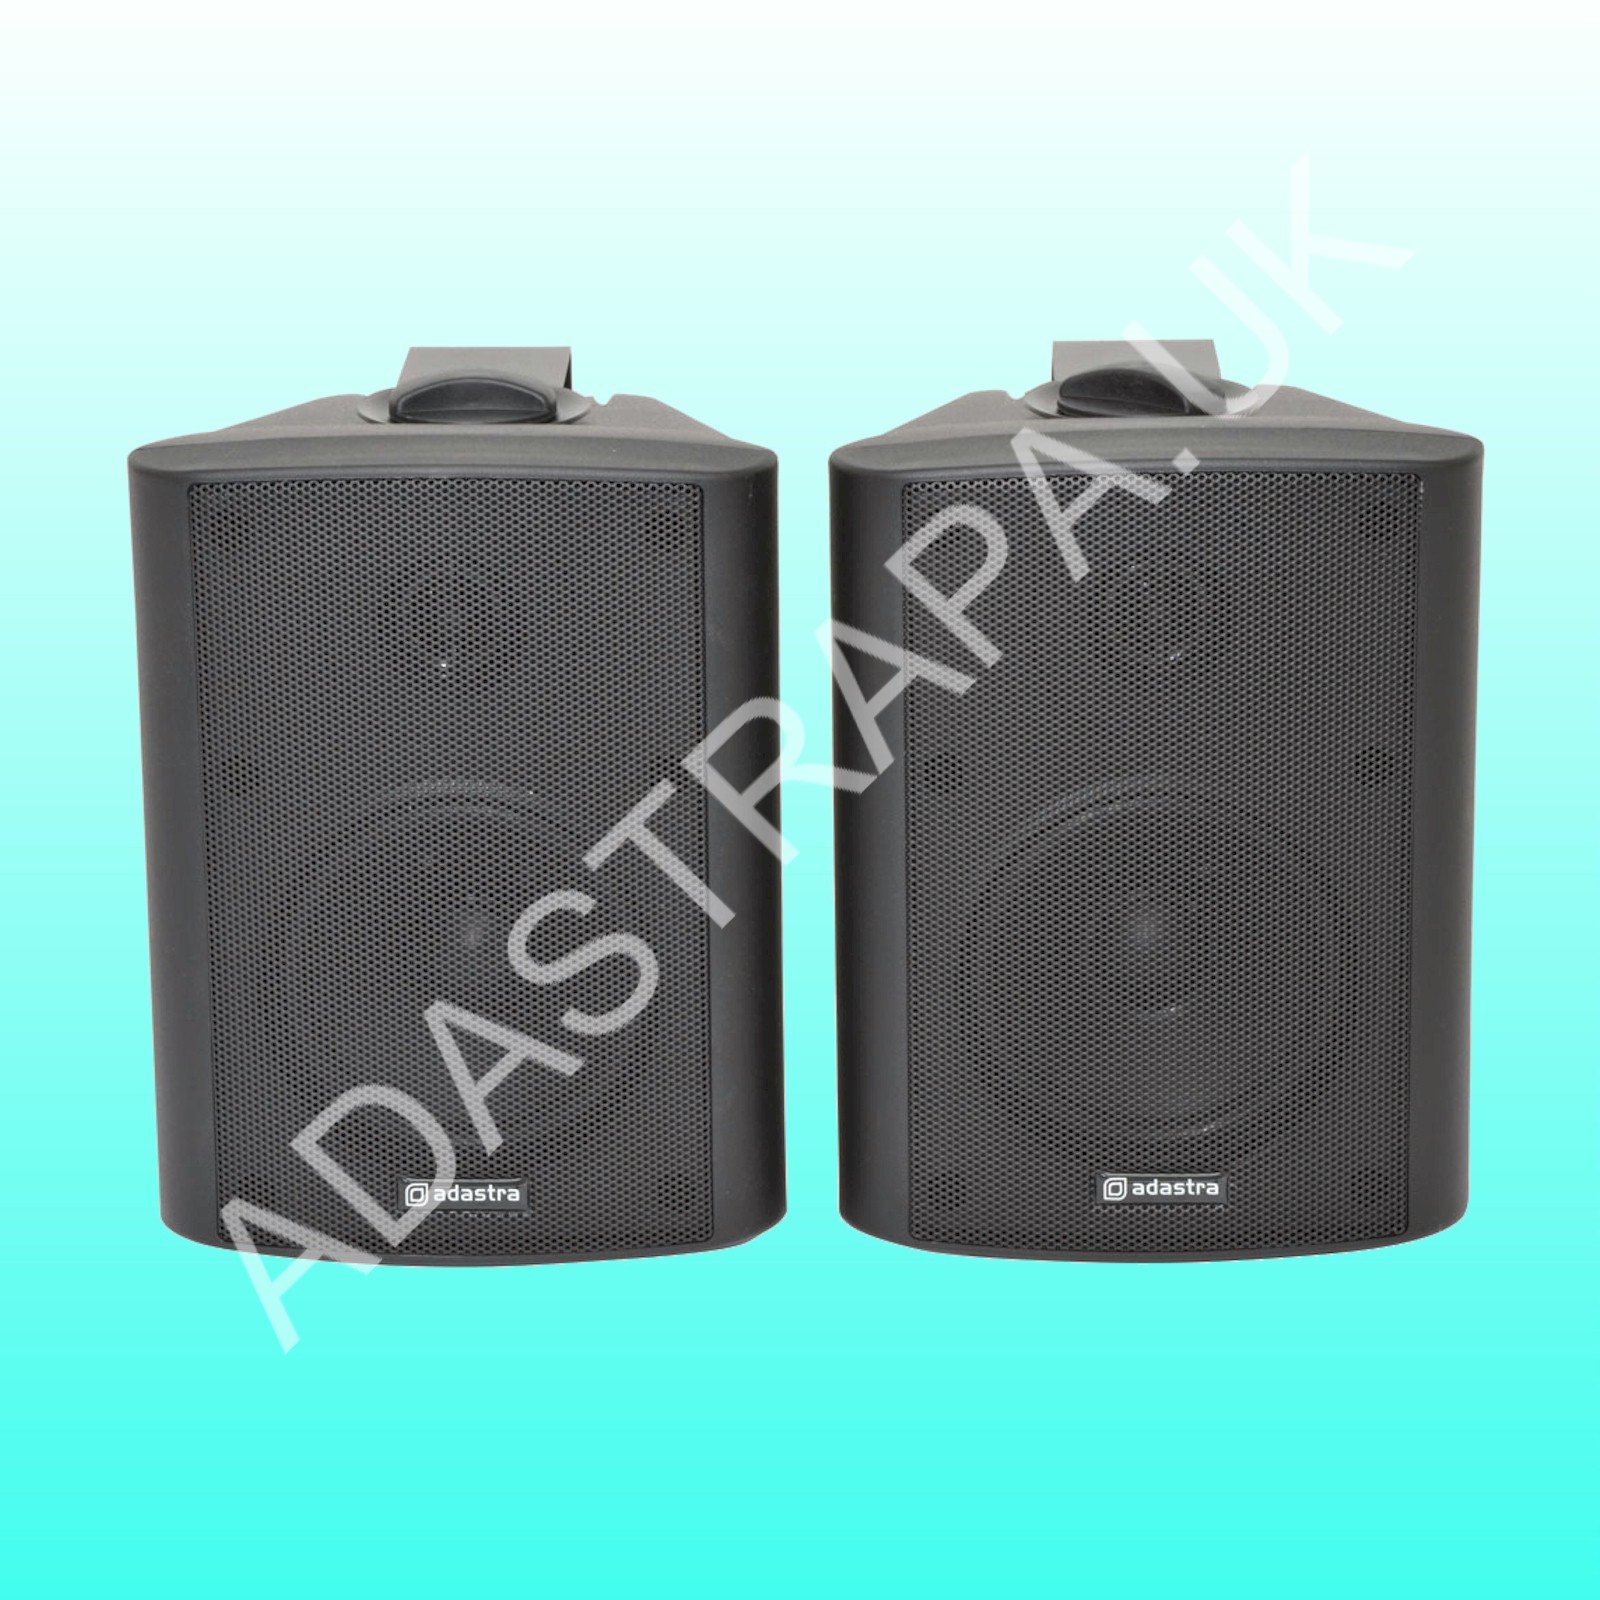 Adastra A8/BC6-B 4 x 2 x 200W rms Stereo Indoor Music PA System 60W rms 6.5